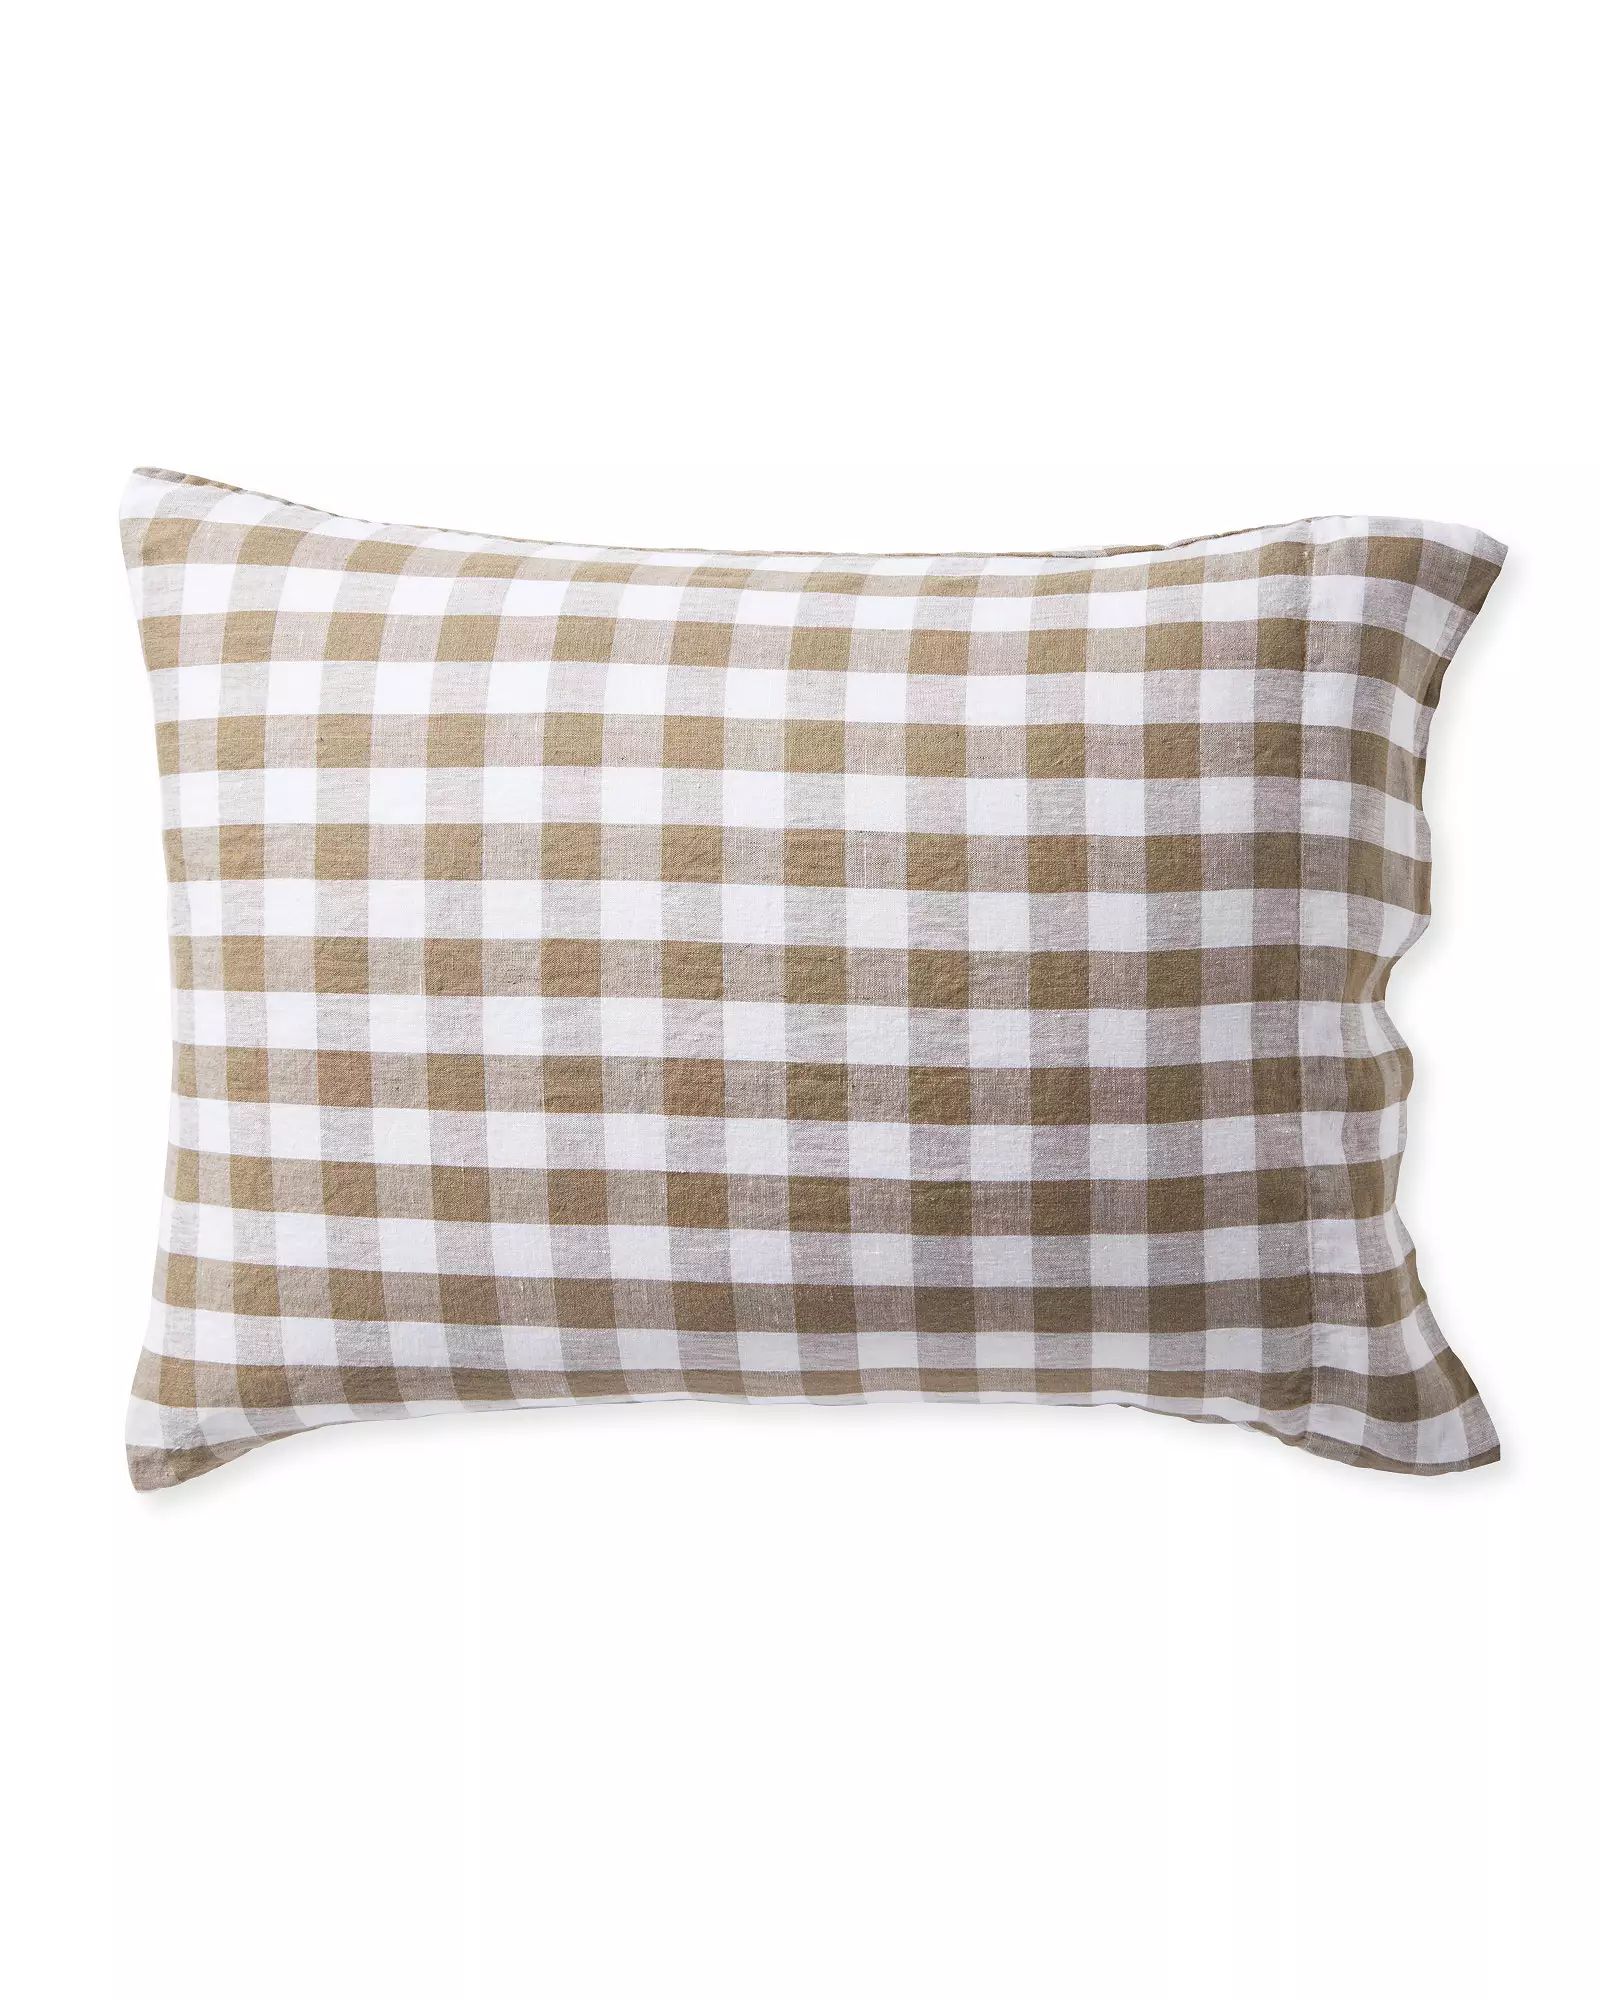 Hyannis Linen Pillowcases (Set of 2) | Serena and Lily